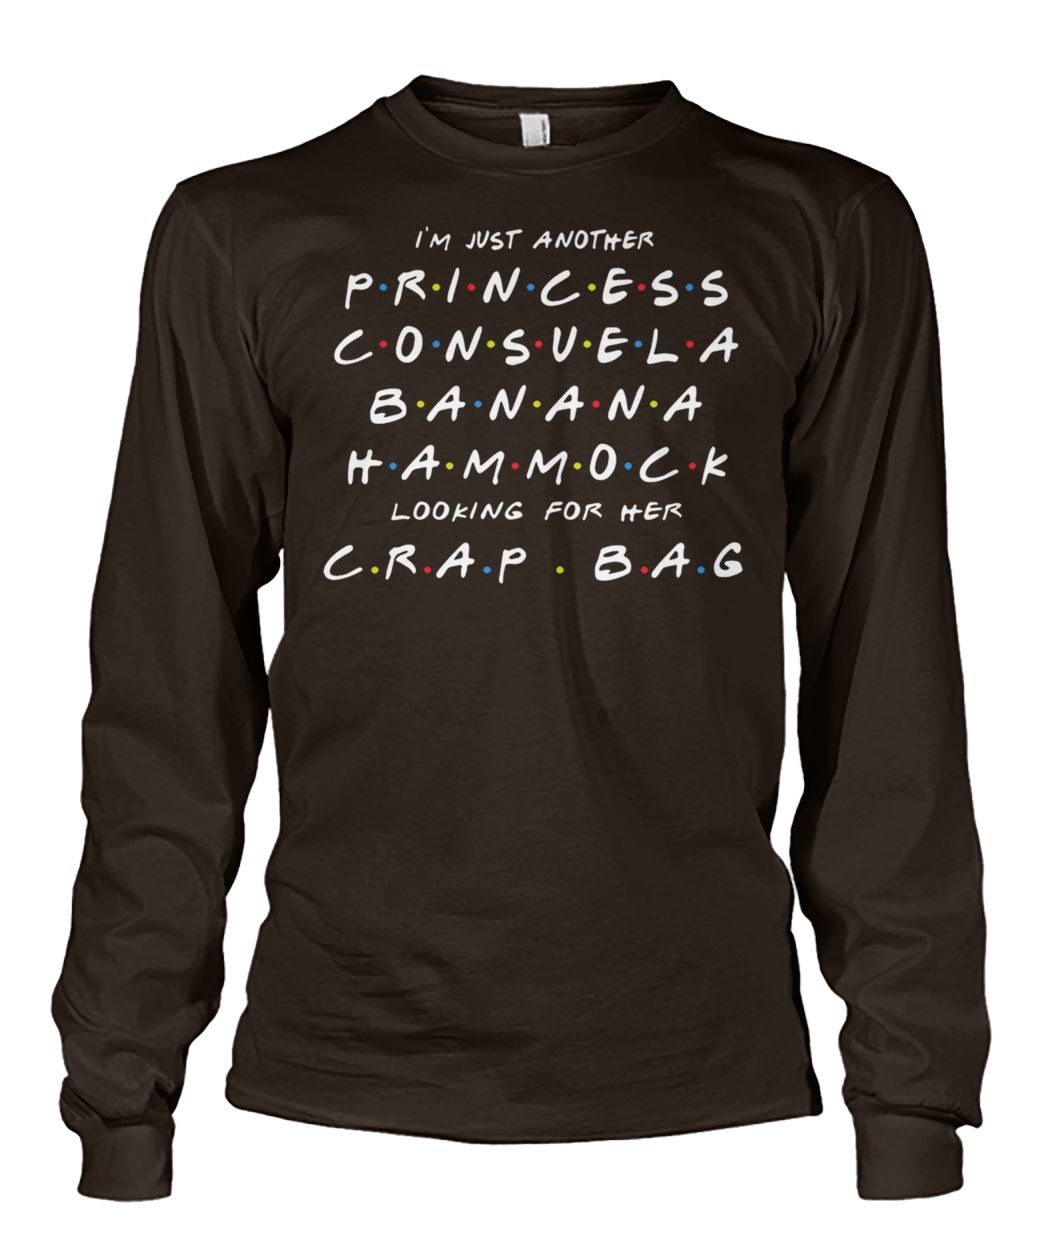 Friends tv show I'm just another princess consuela banana hammock looking for her crap bag unisex long sleeve